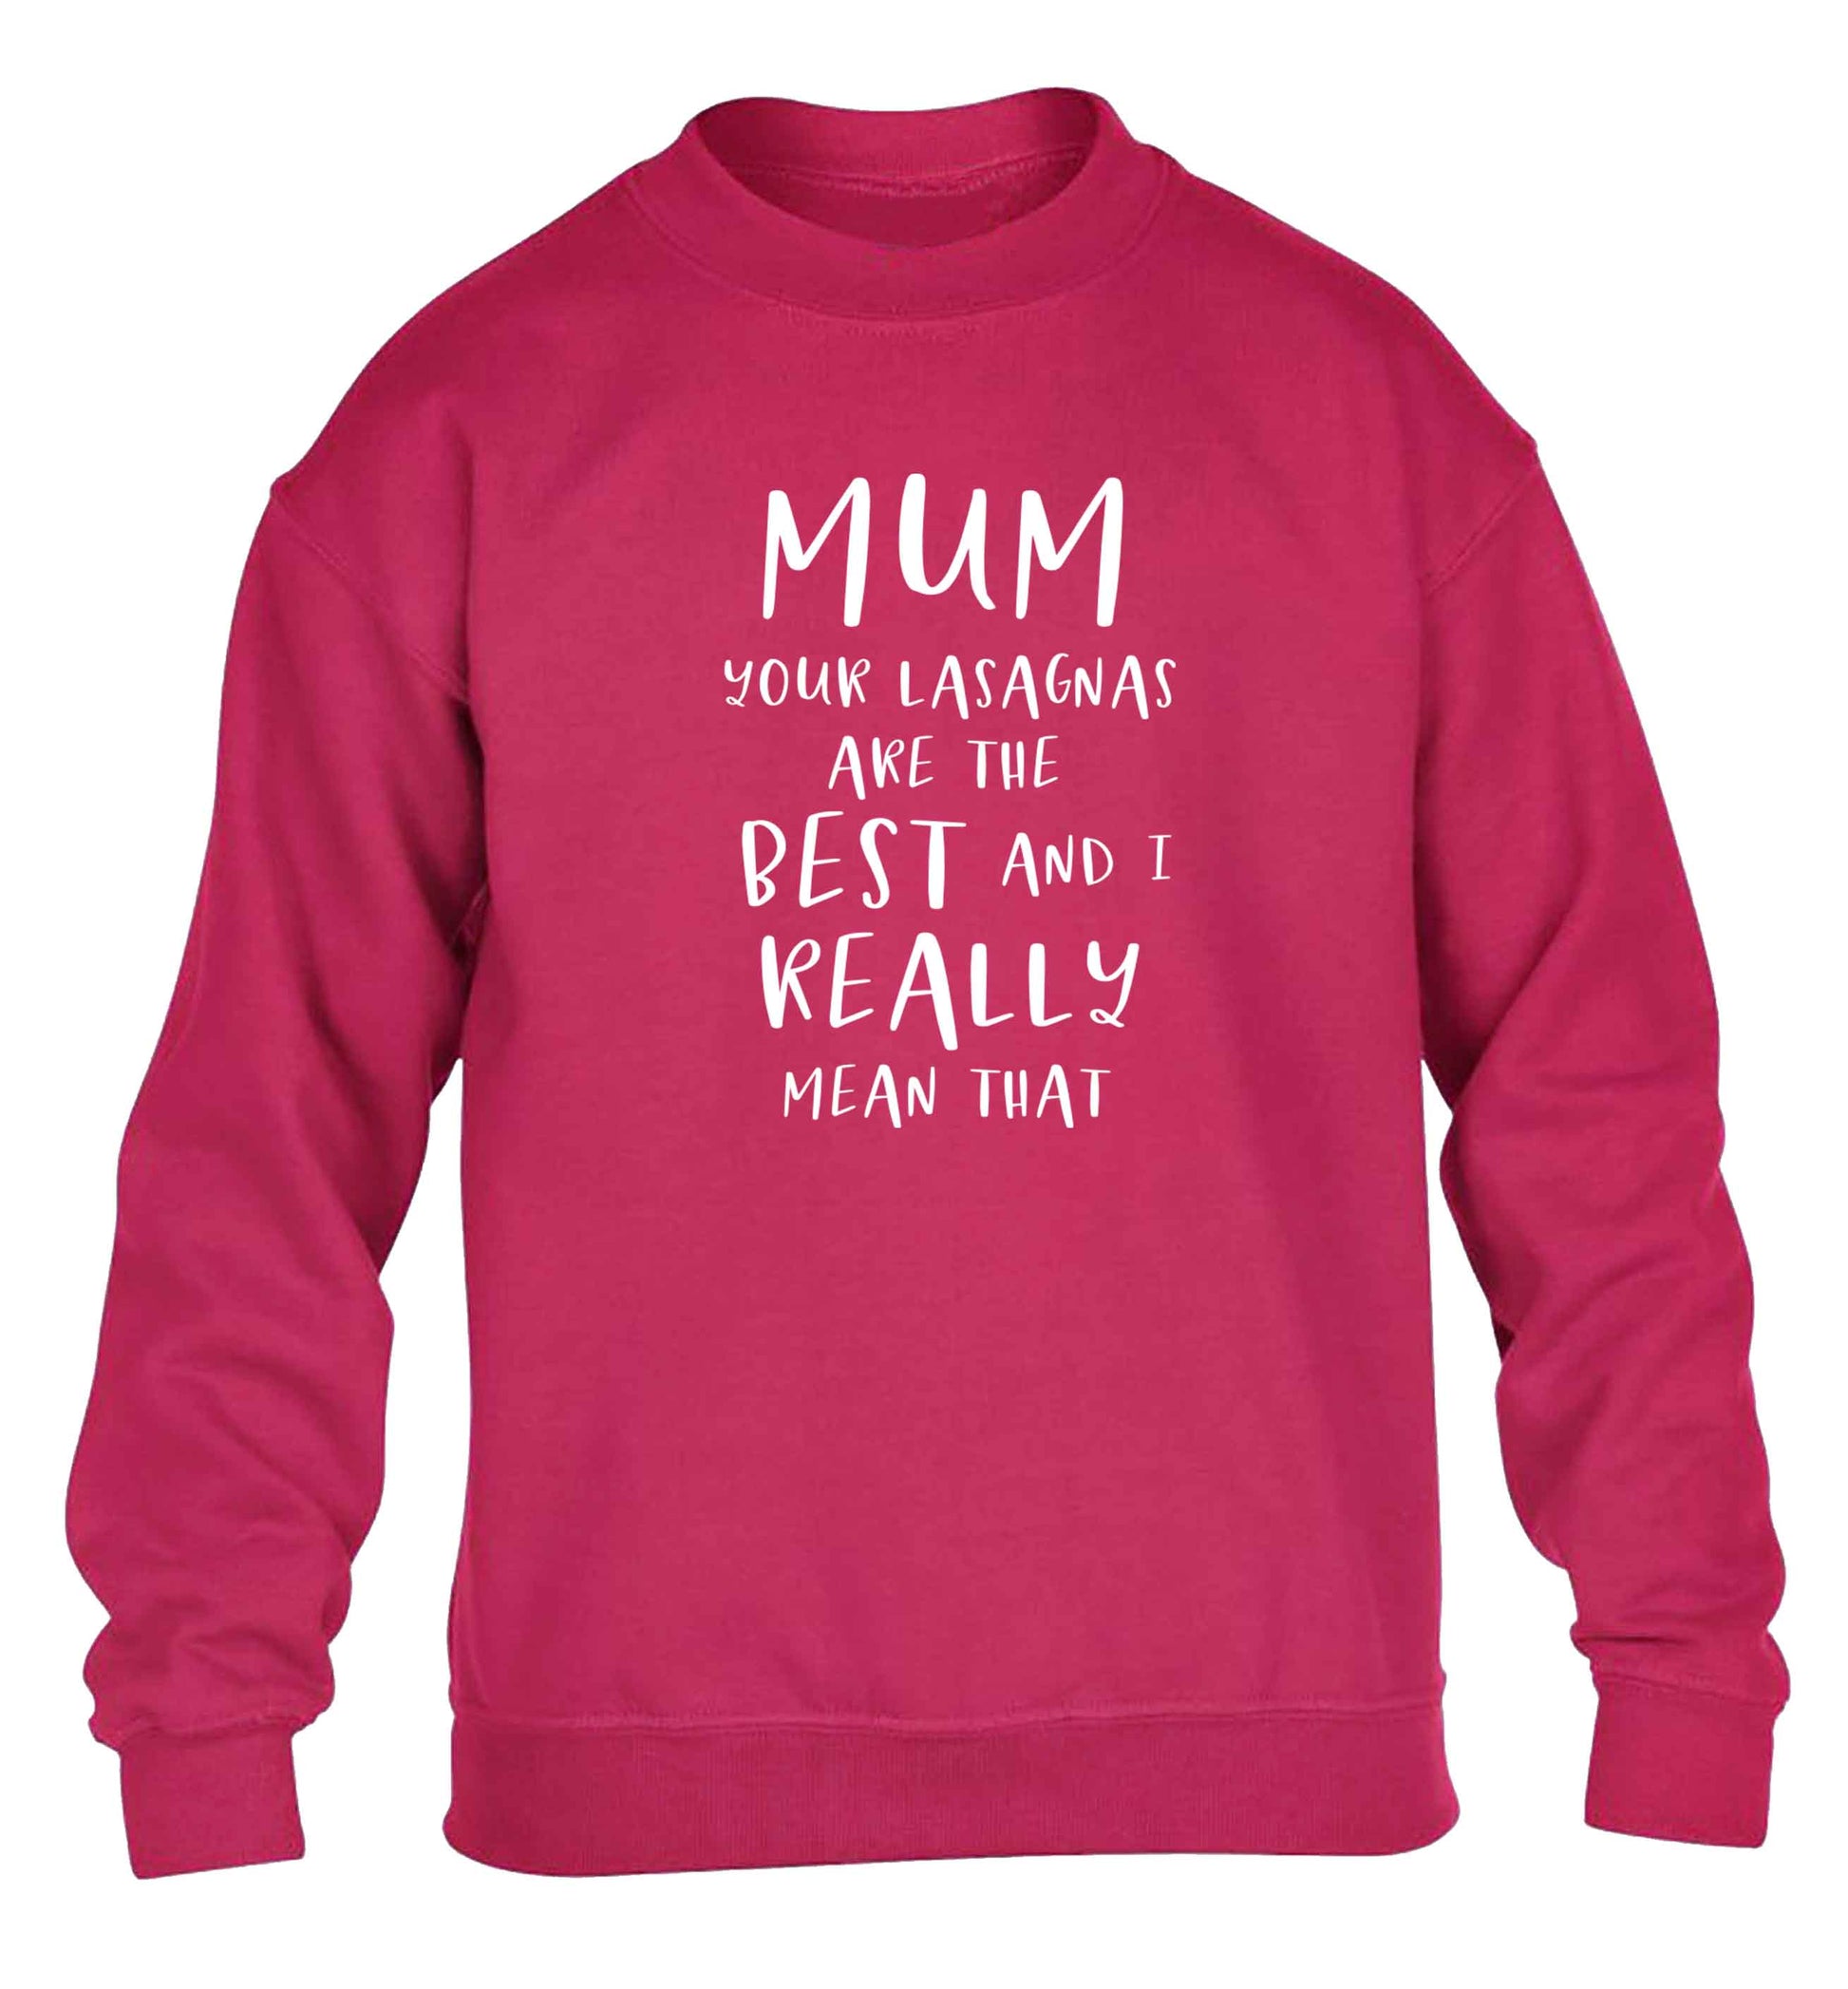 Funny gifts for your mum on mother's dayor her birthday! Mum your lasagnas are the best and I really mean that children's pink sweater 12-13 Years